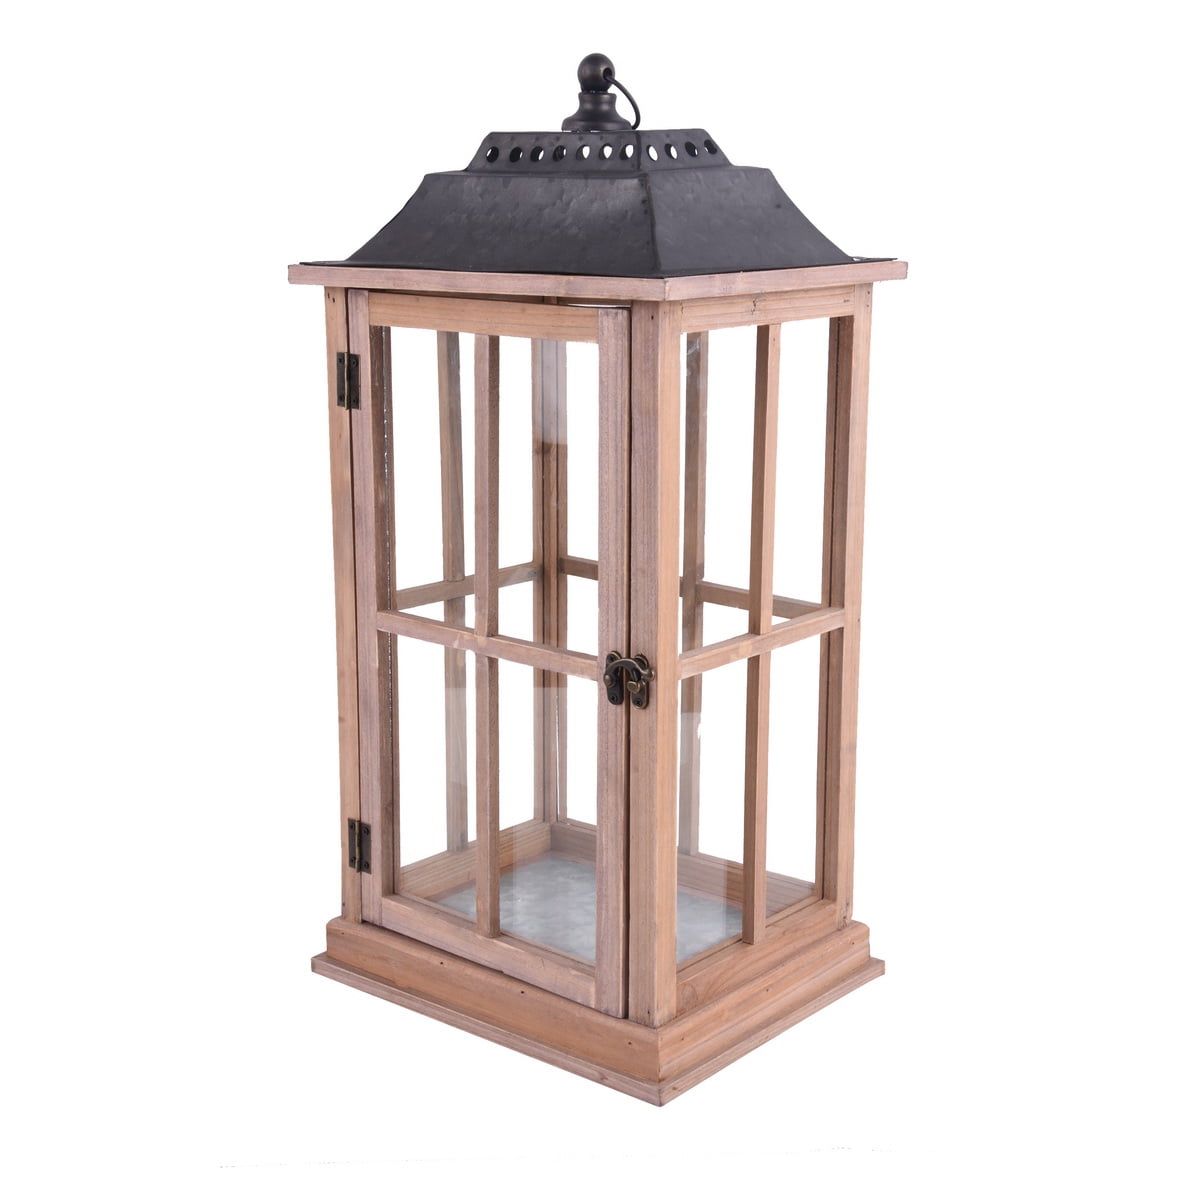 H Potter Rustic Decor Large Lighting Garden Gift Decorative Candle Holder Hanging Glass Candle Lantern Wedding Patio Deck